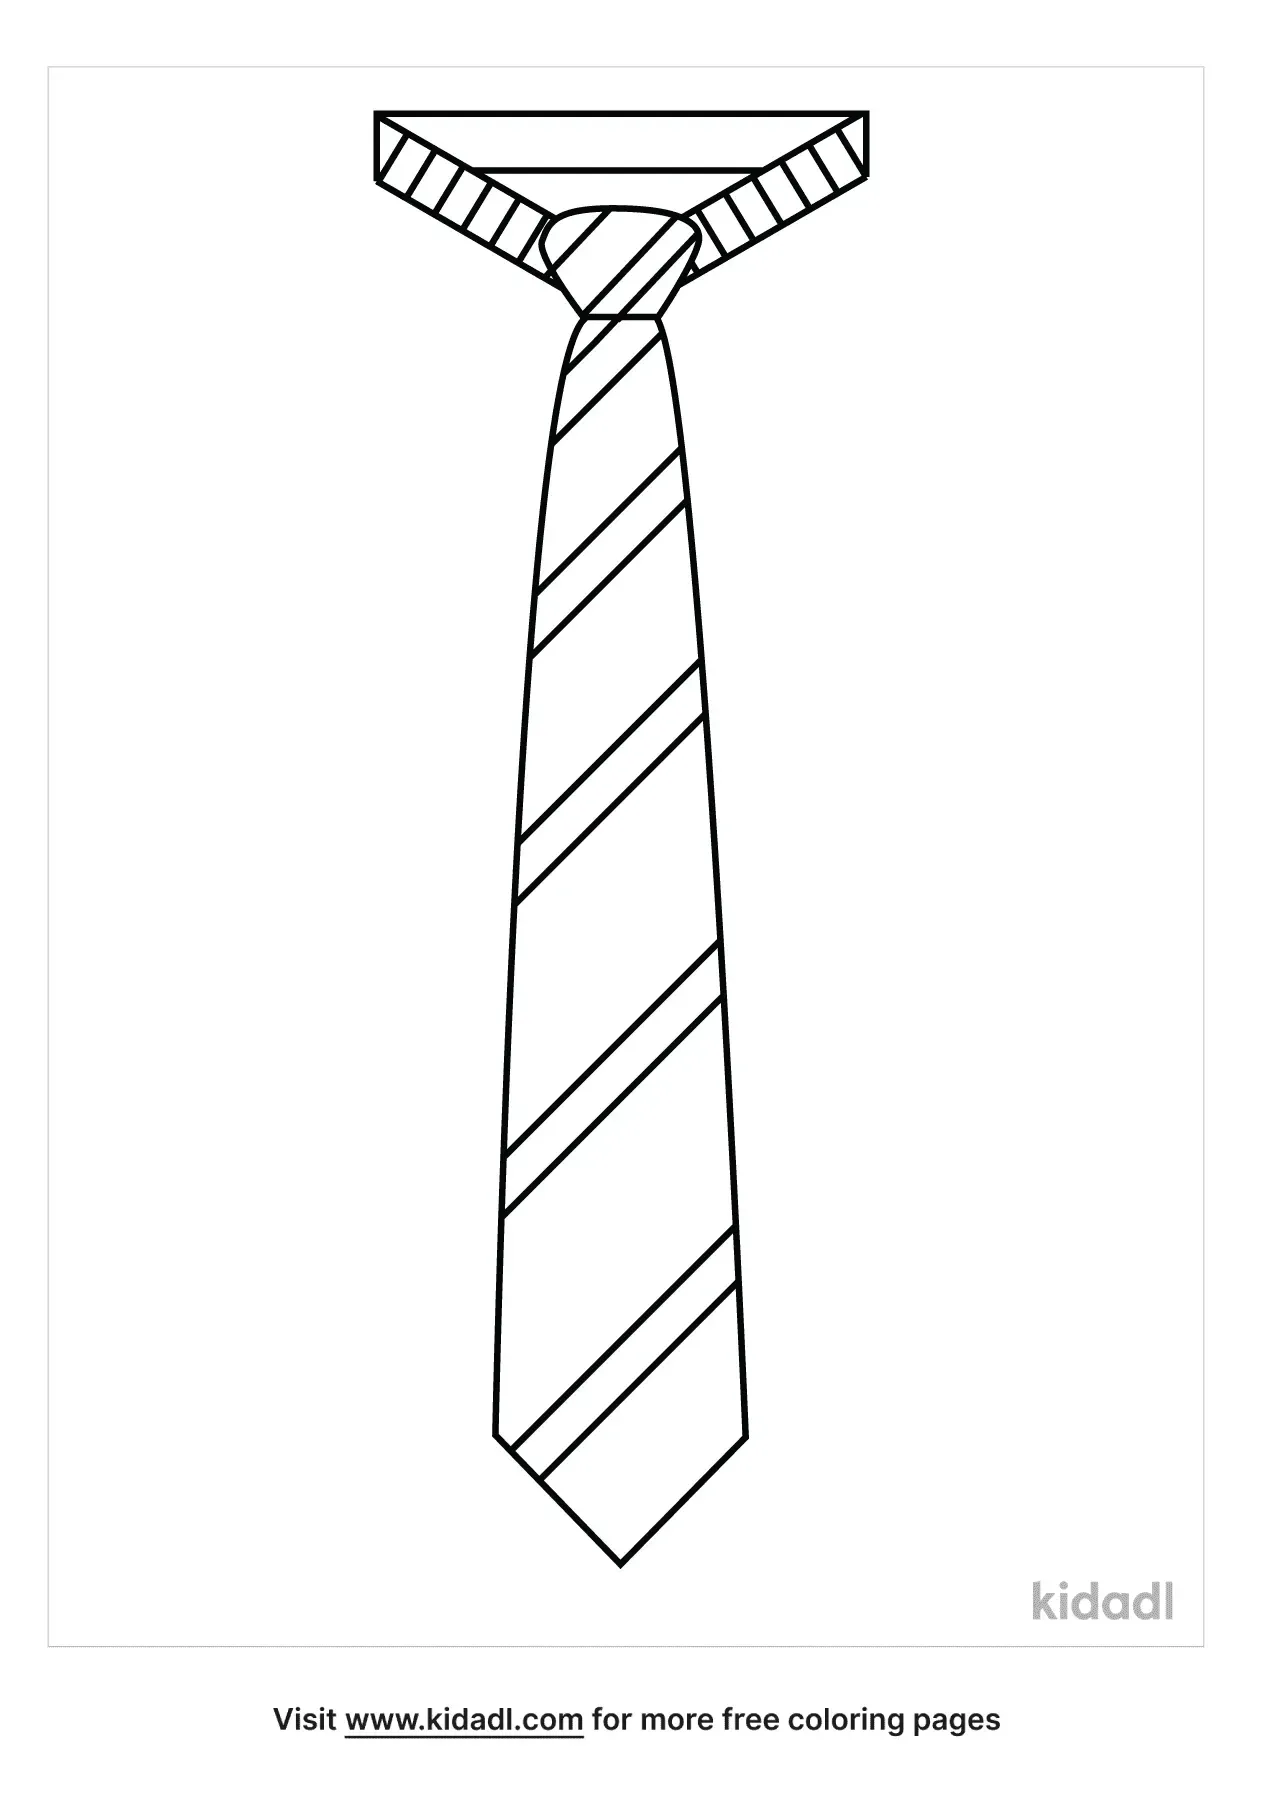 free-striped-tie-coloring-page-coloring-page-printables-kidadl